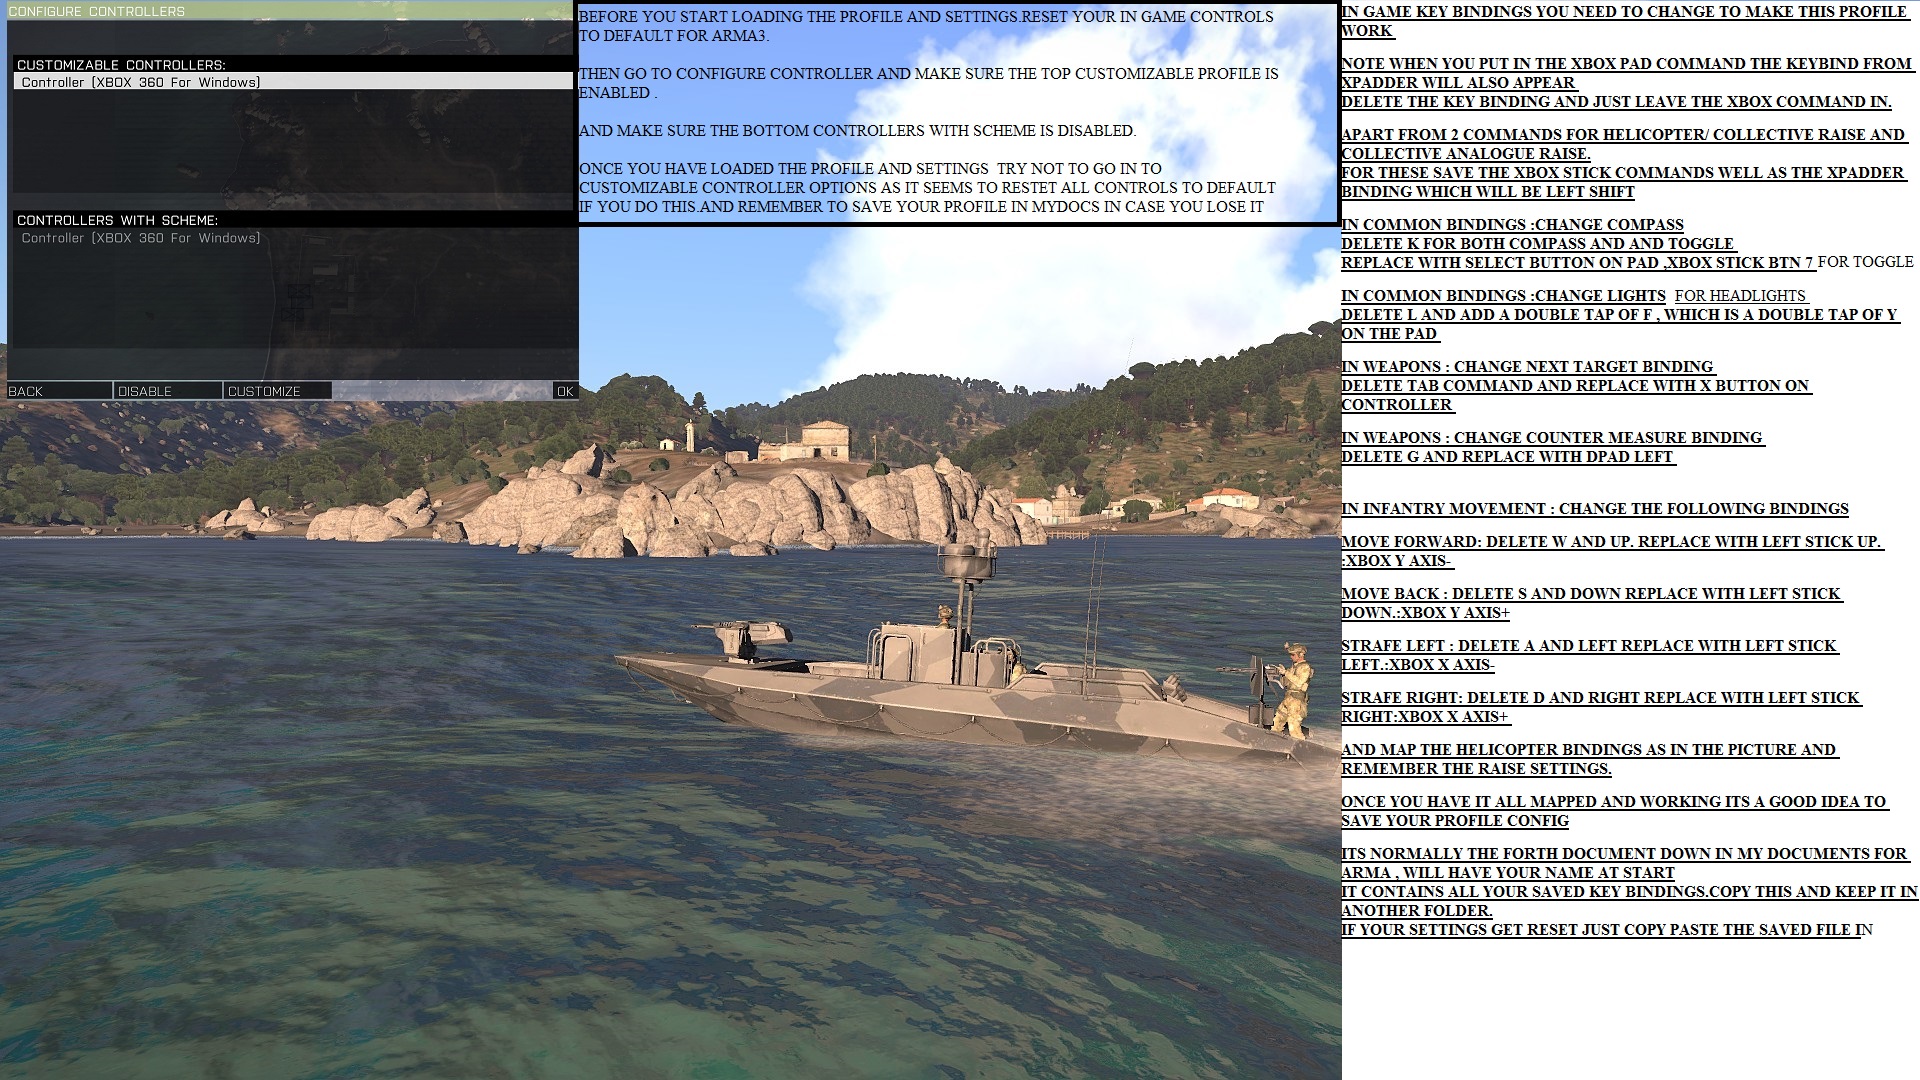 Xbox One Controller Mapping (Xpadder) - ARMA 3 - GENERAL - Bohemia